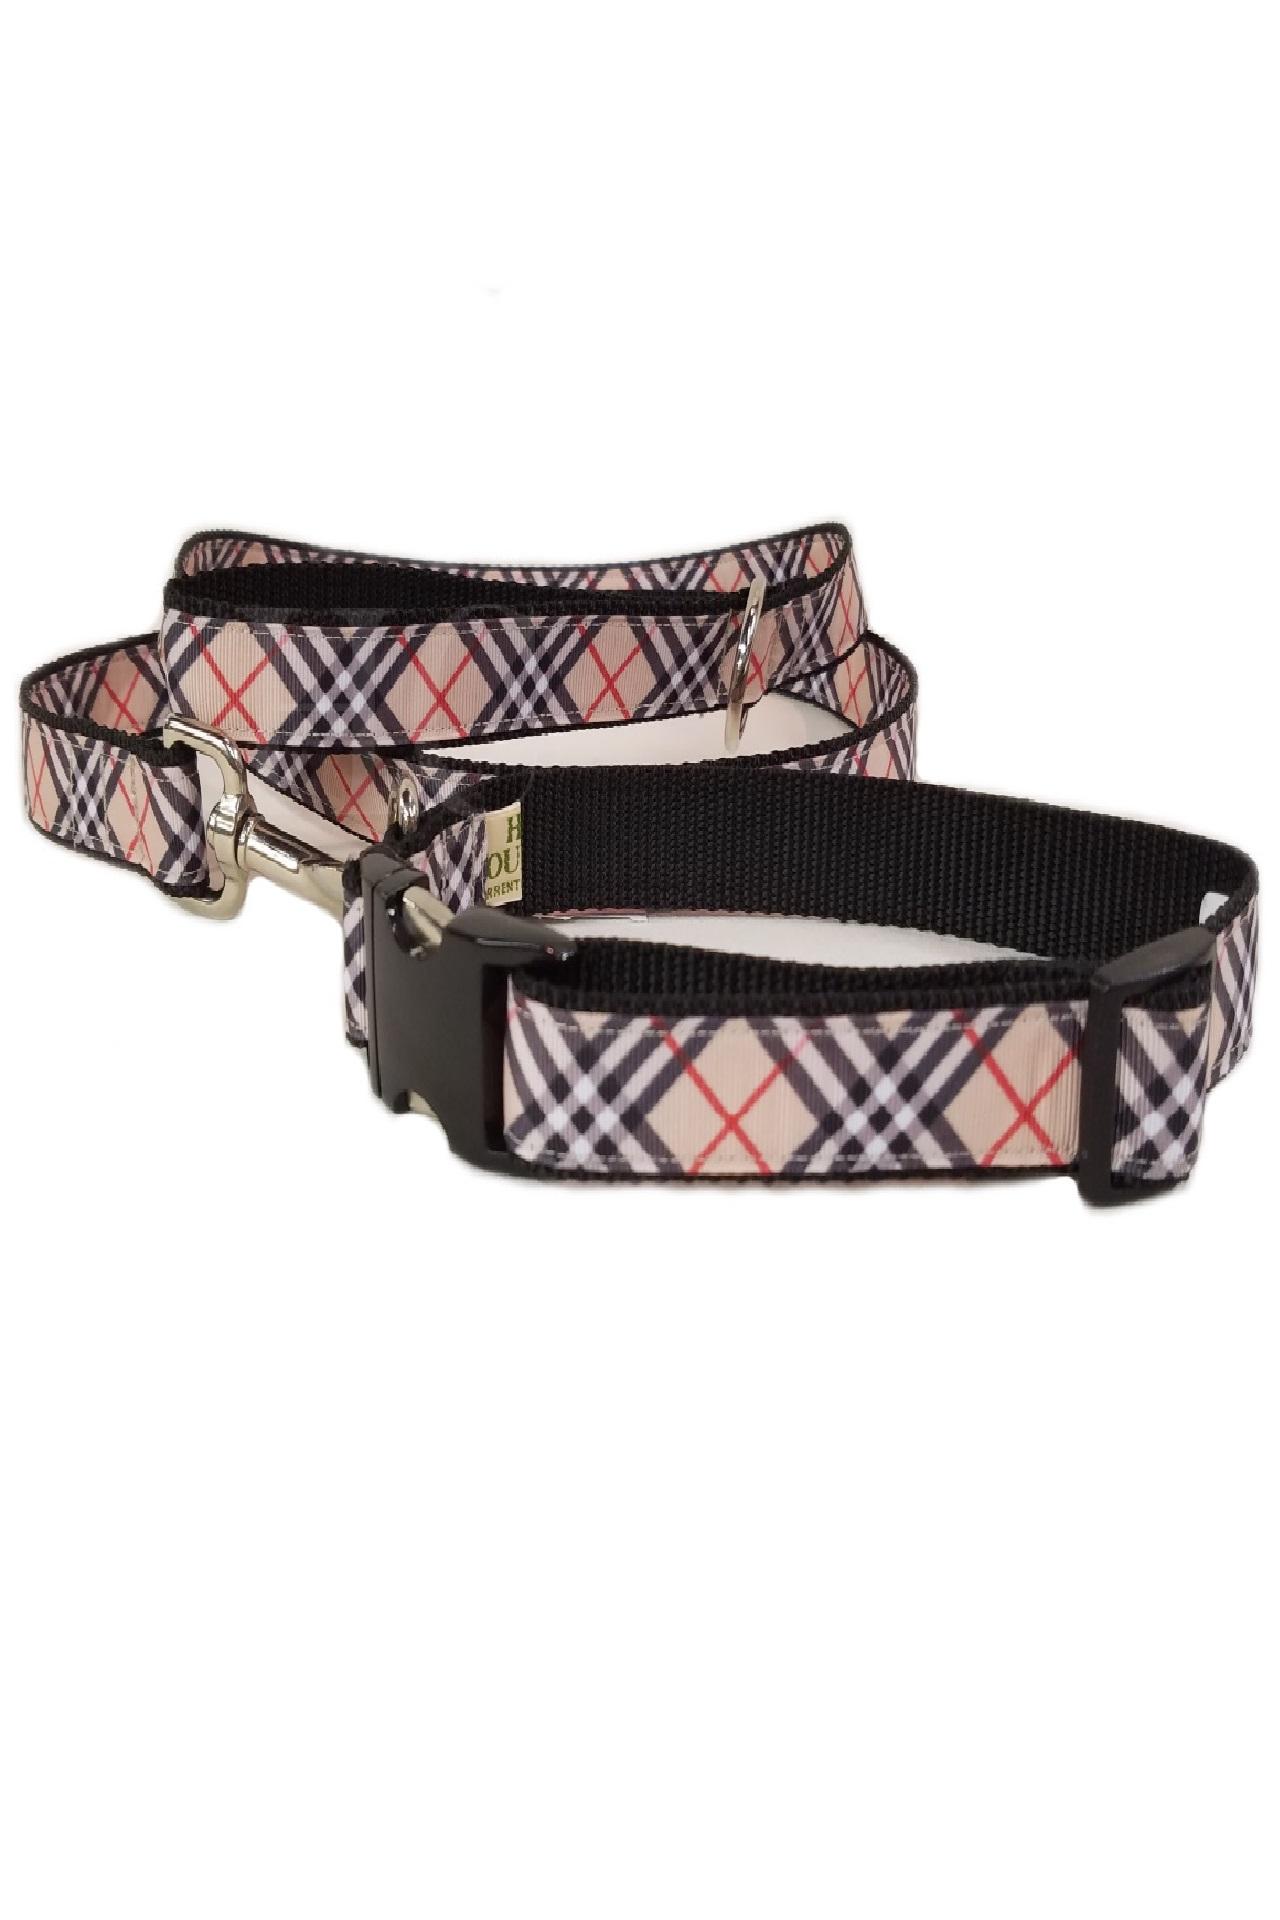 Horse Country Carrot - Burberry Plaid Collar/Leash Set